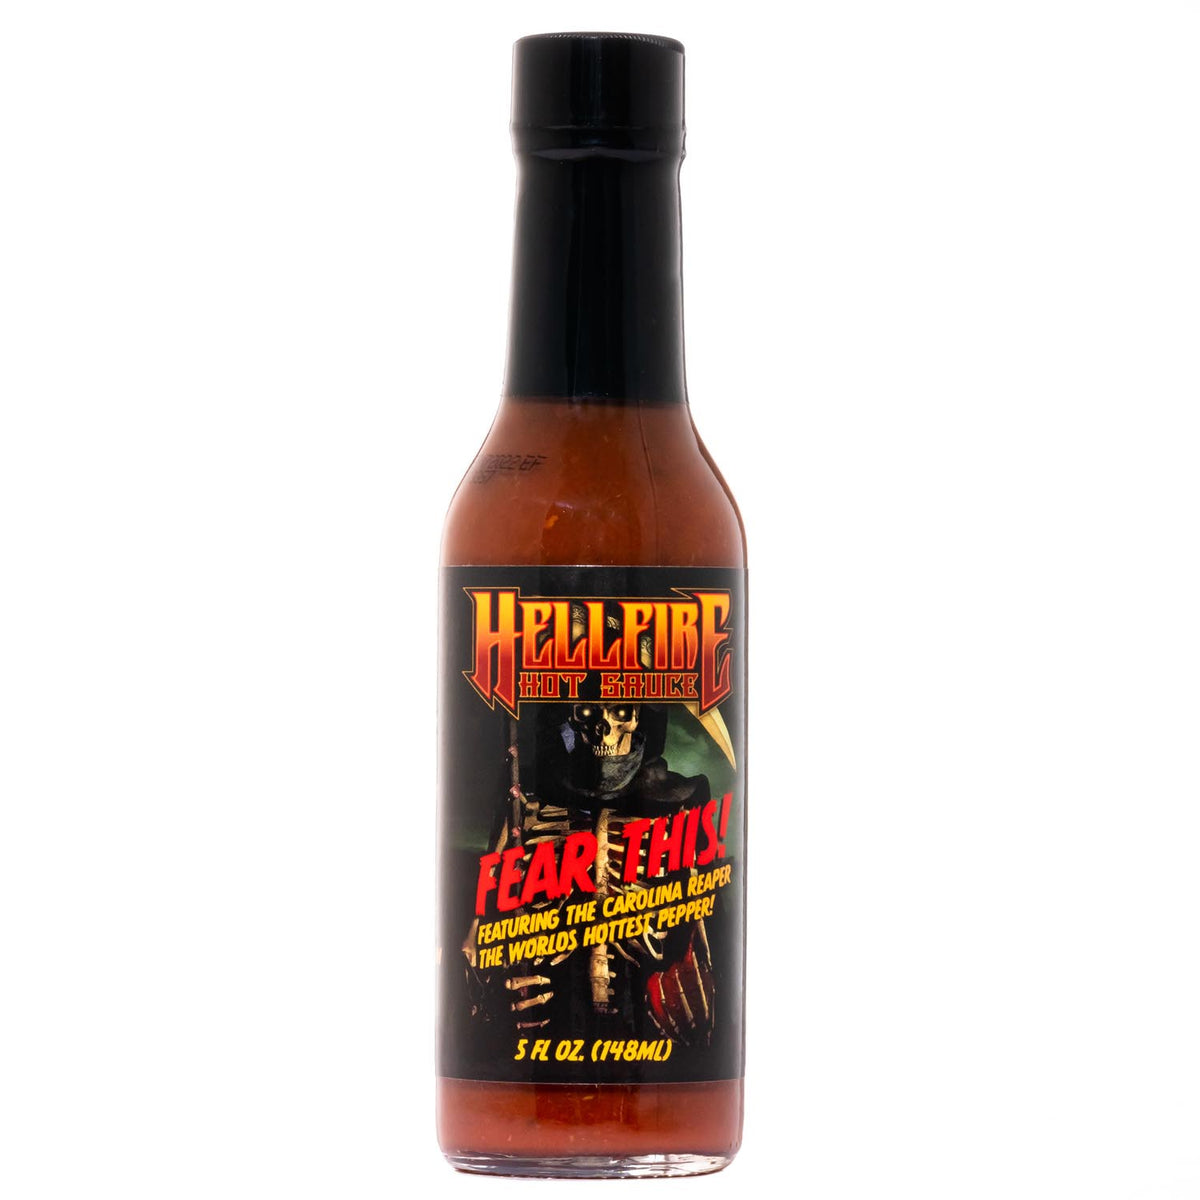 Sauce piquante, Hellfire Fear This